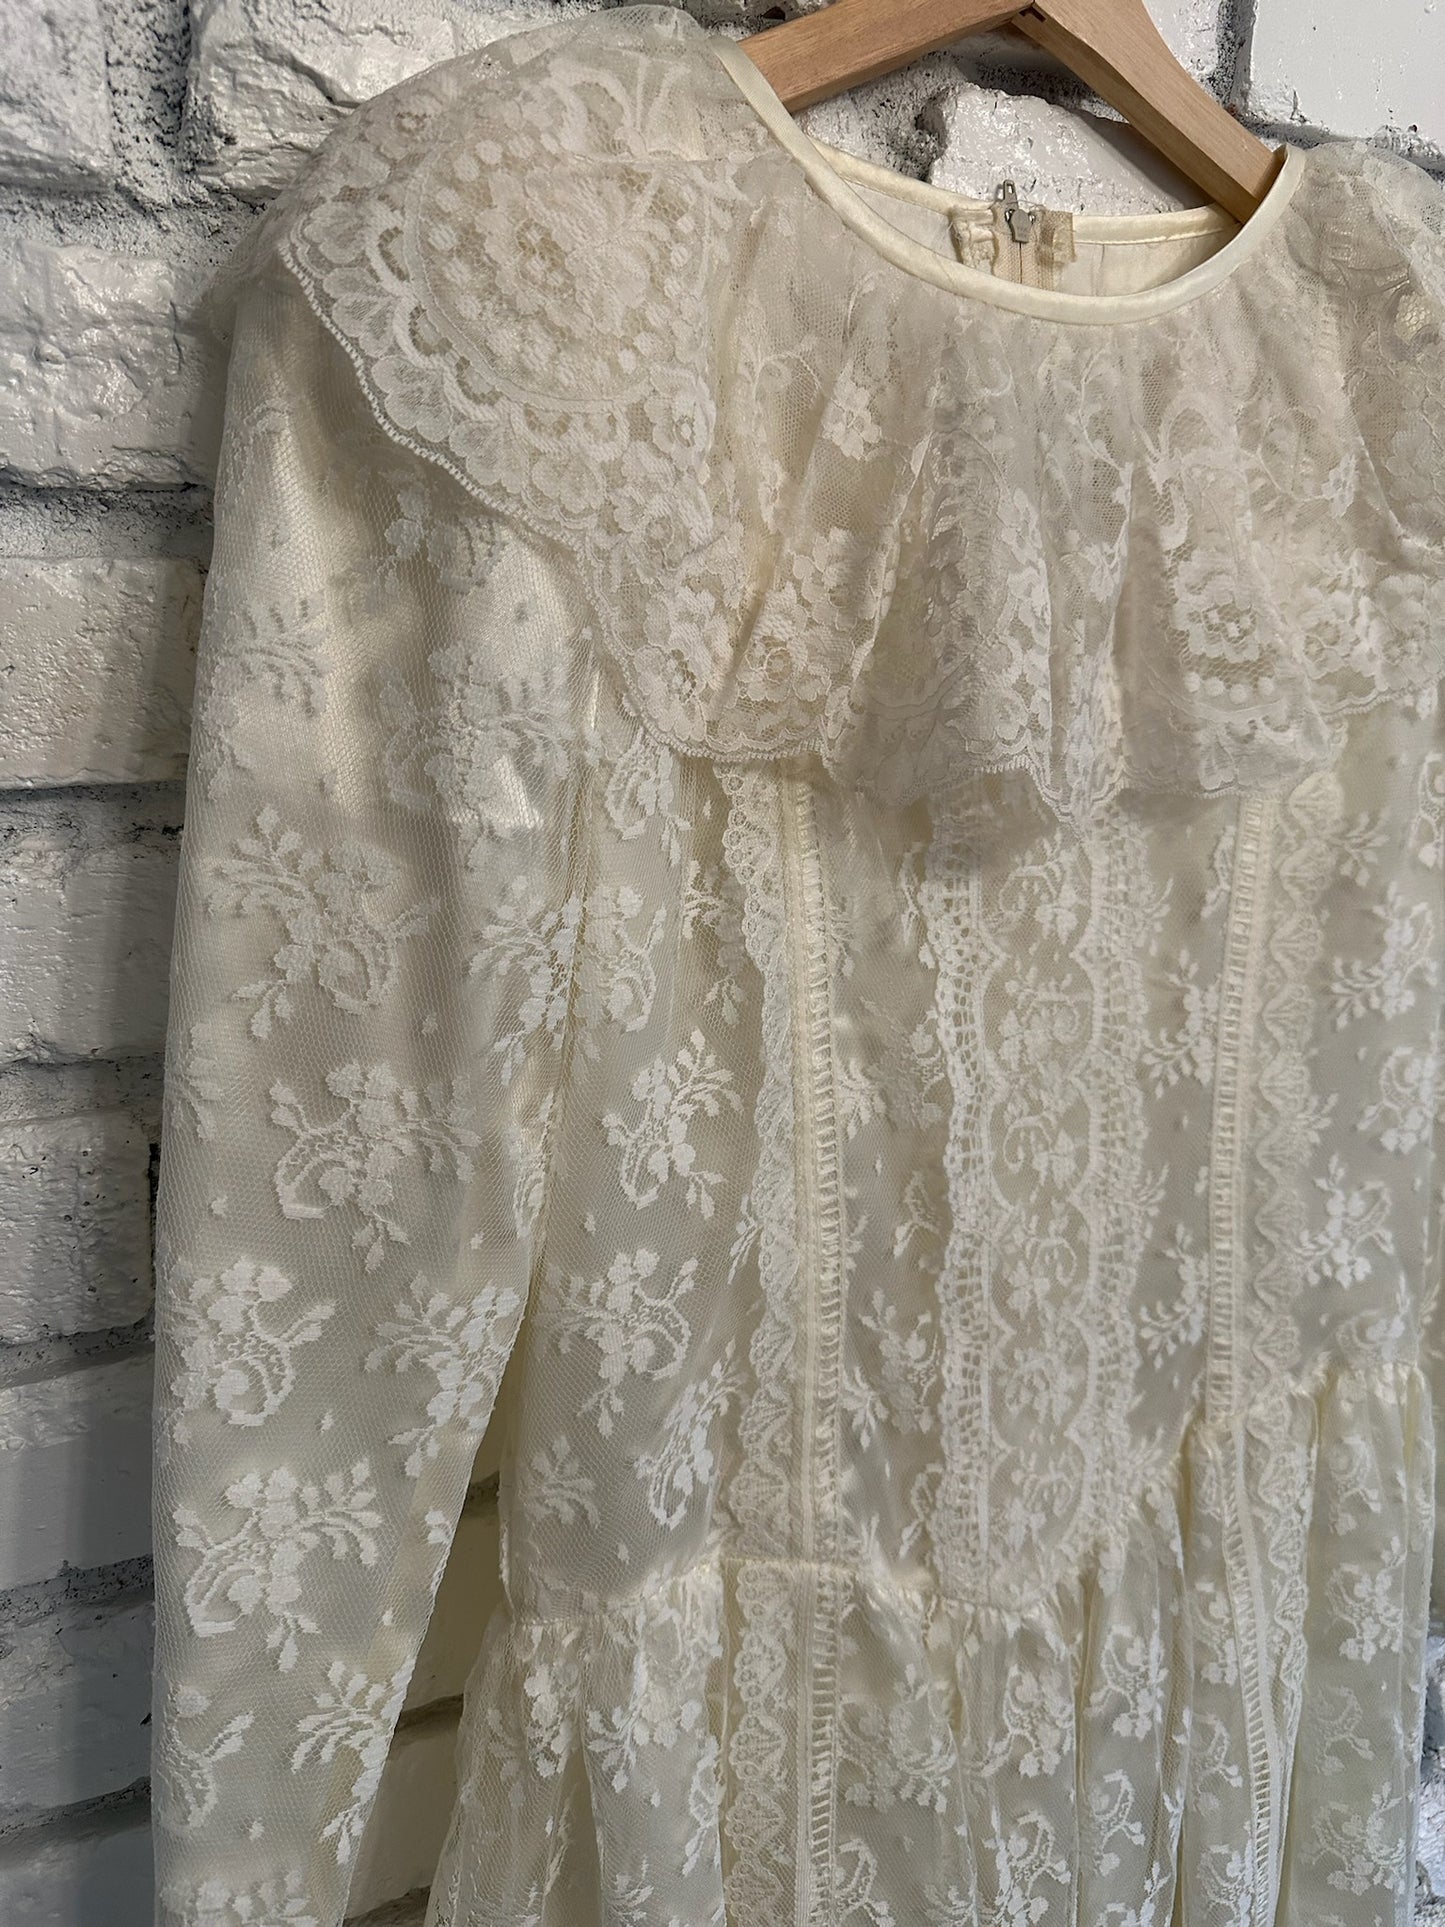 The Belle White Lace Dress